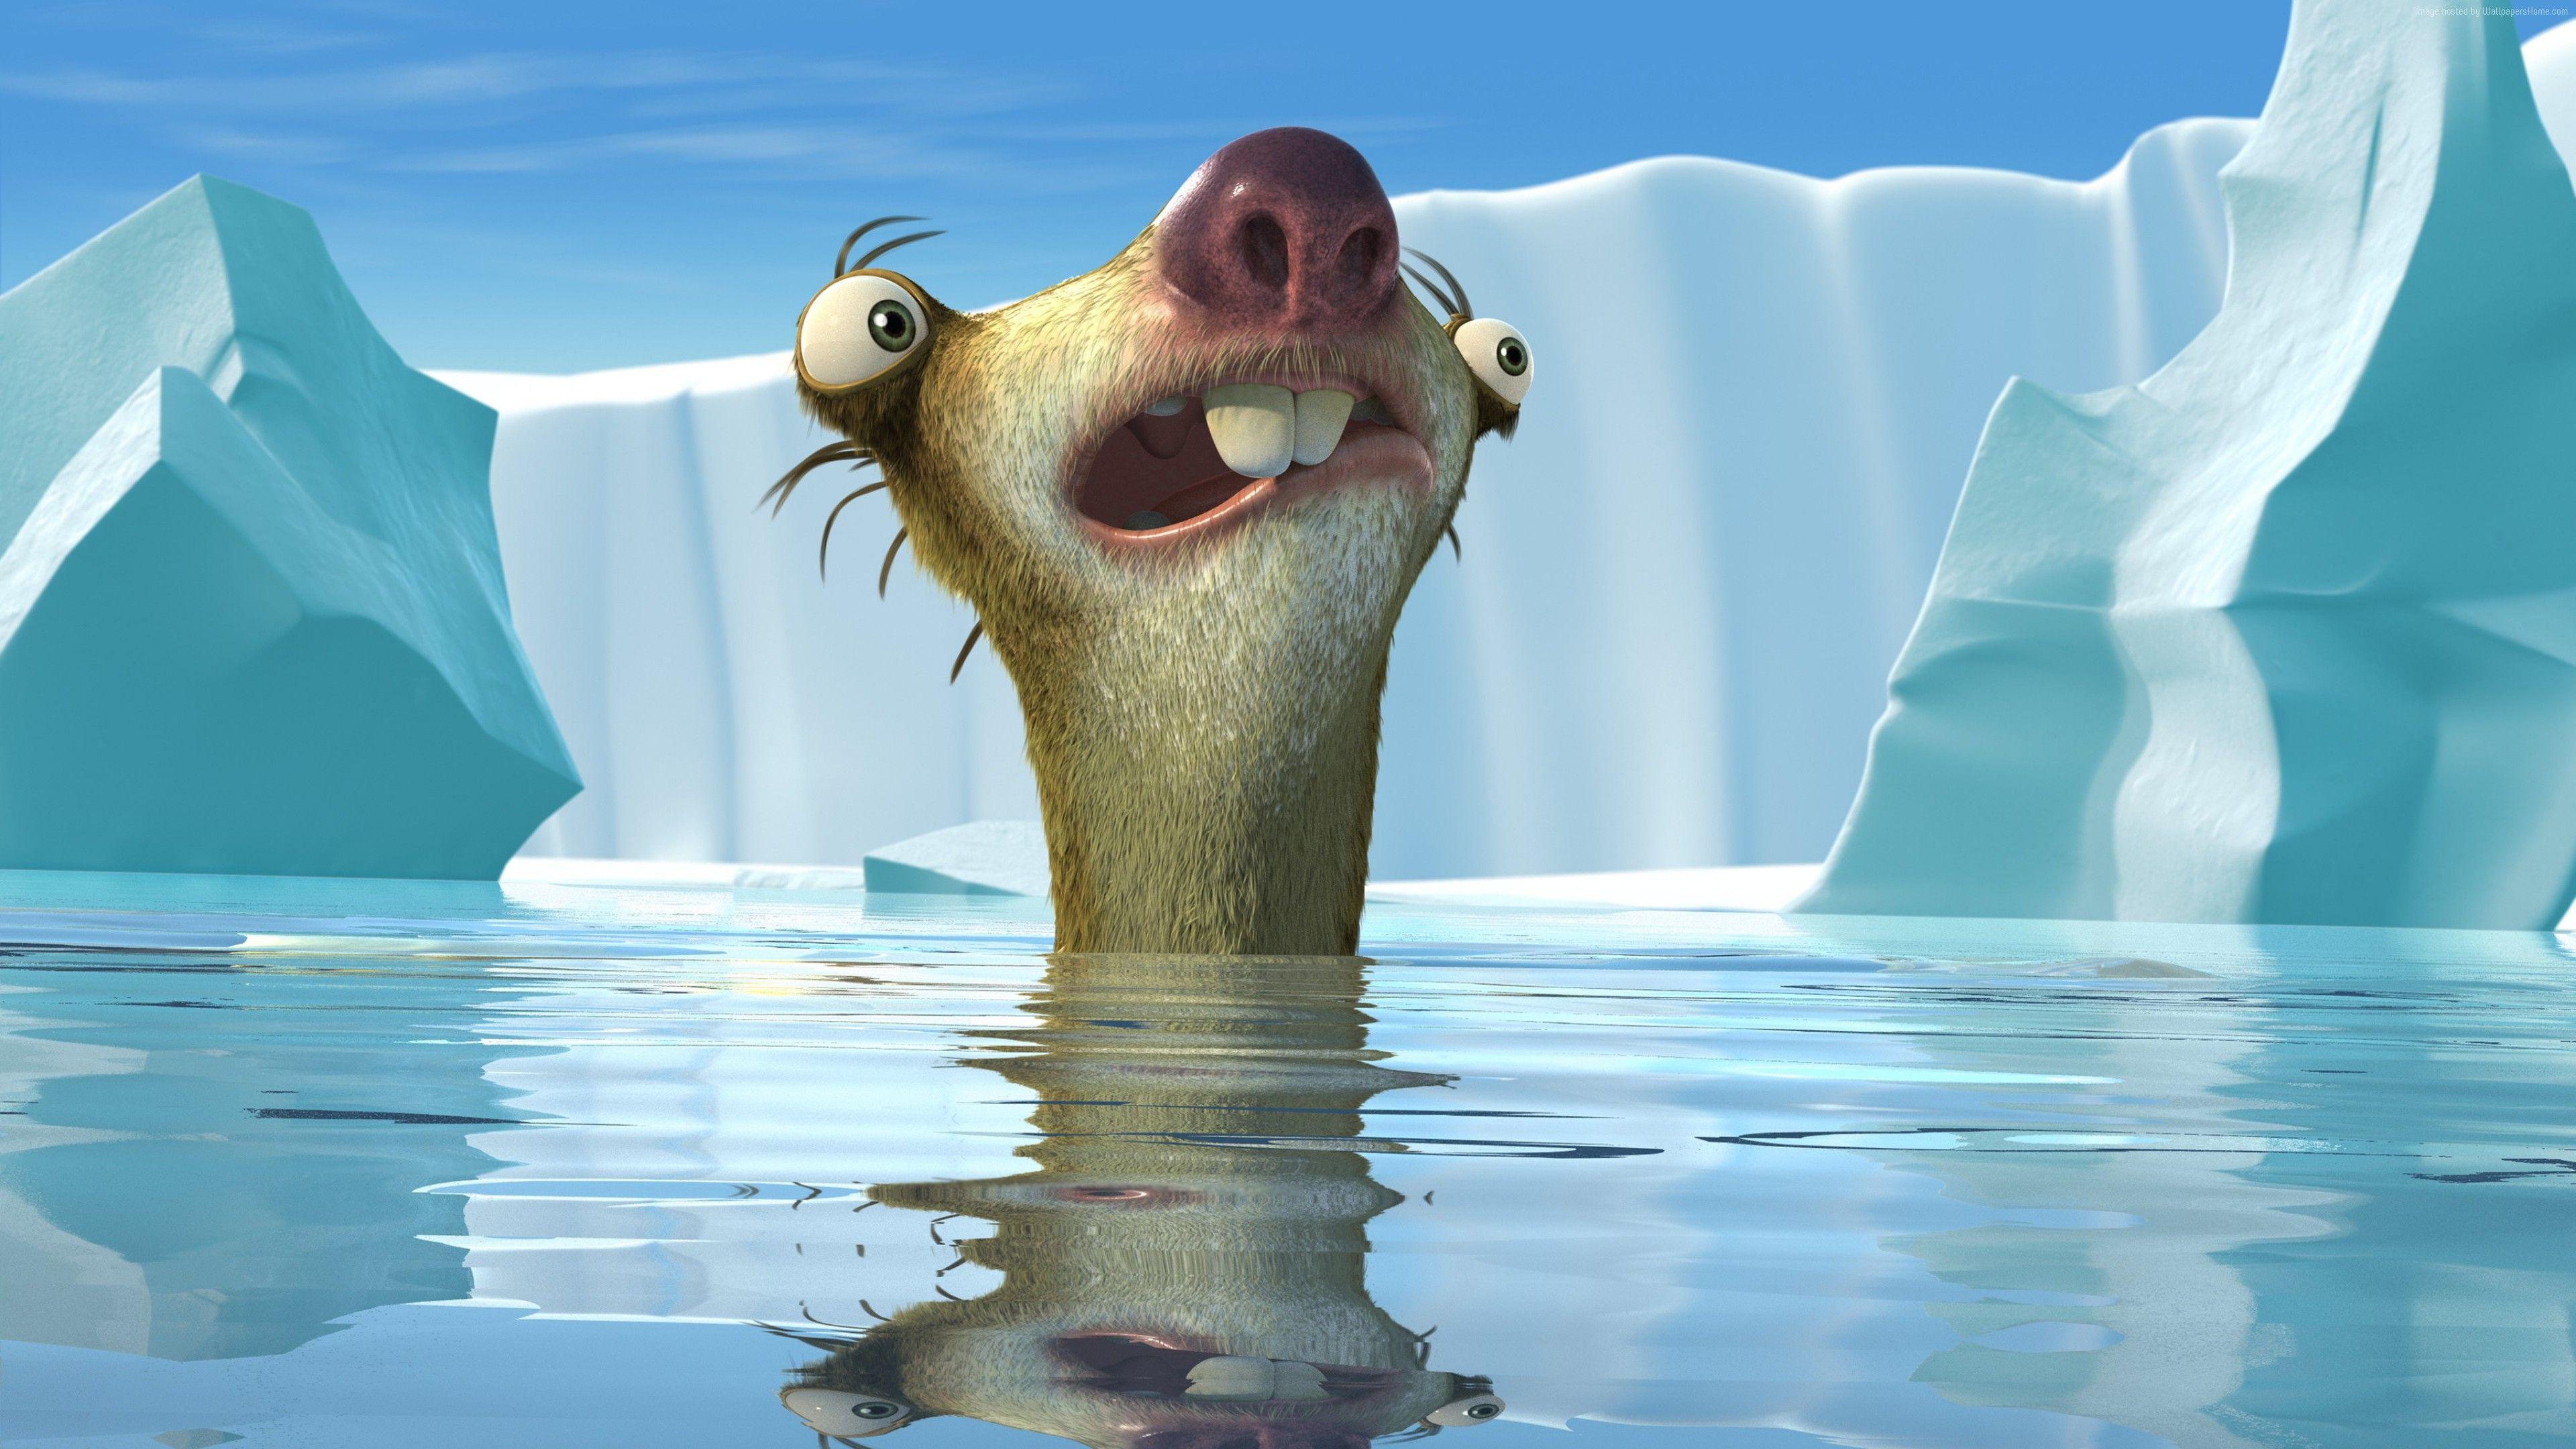 Ice Age 5 Sid, HD Movies, 4k Wallpaper, Image, Background, Photo